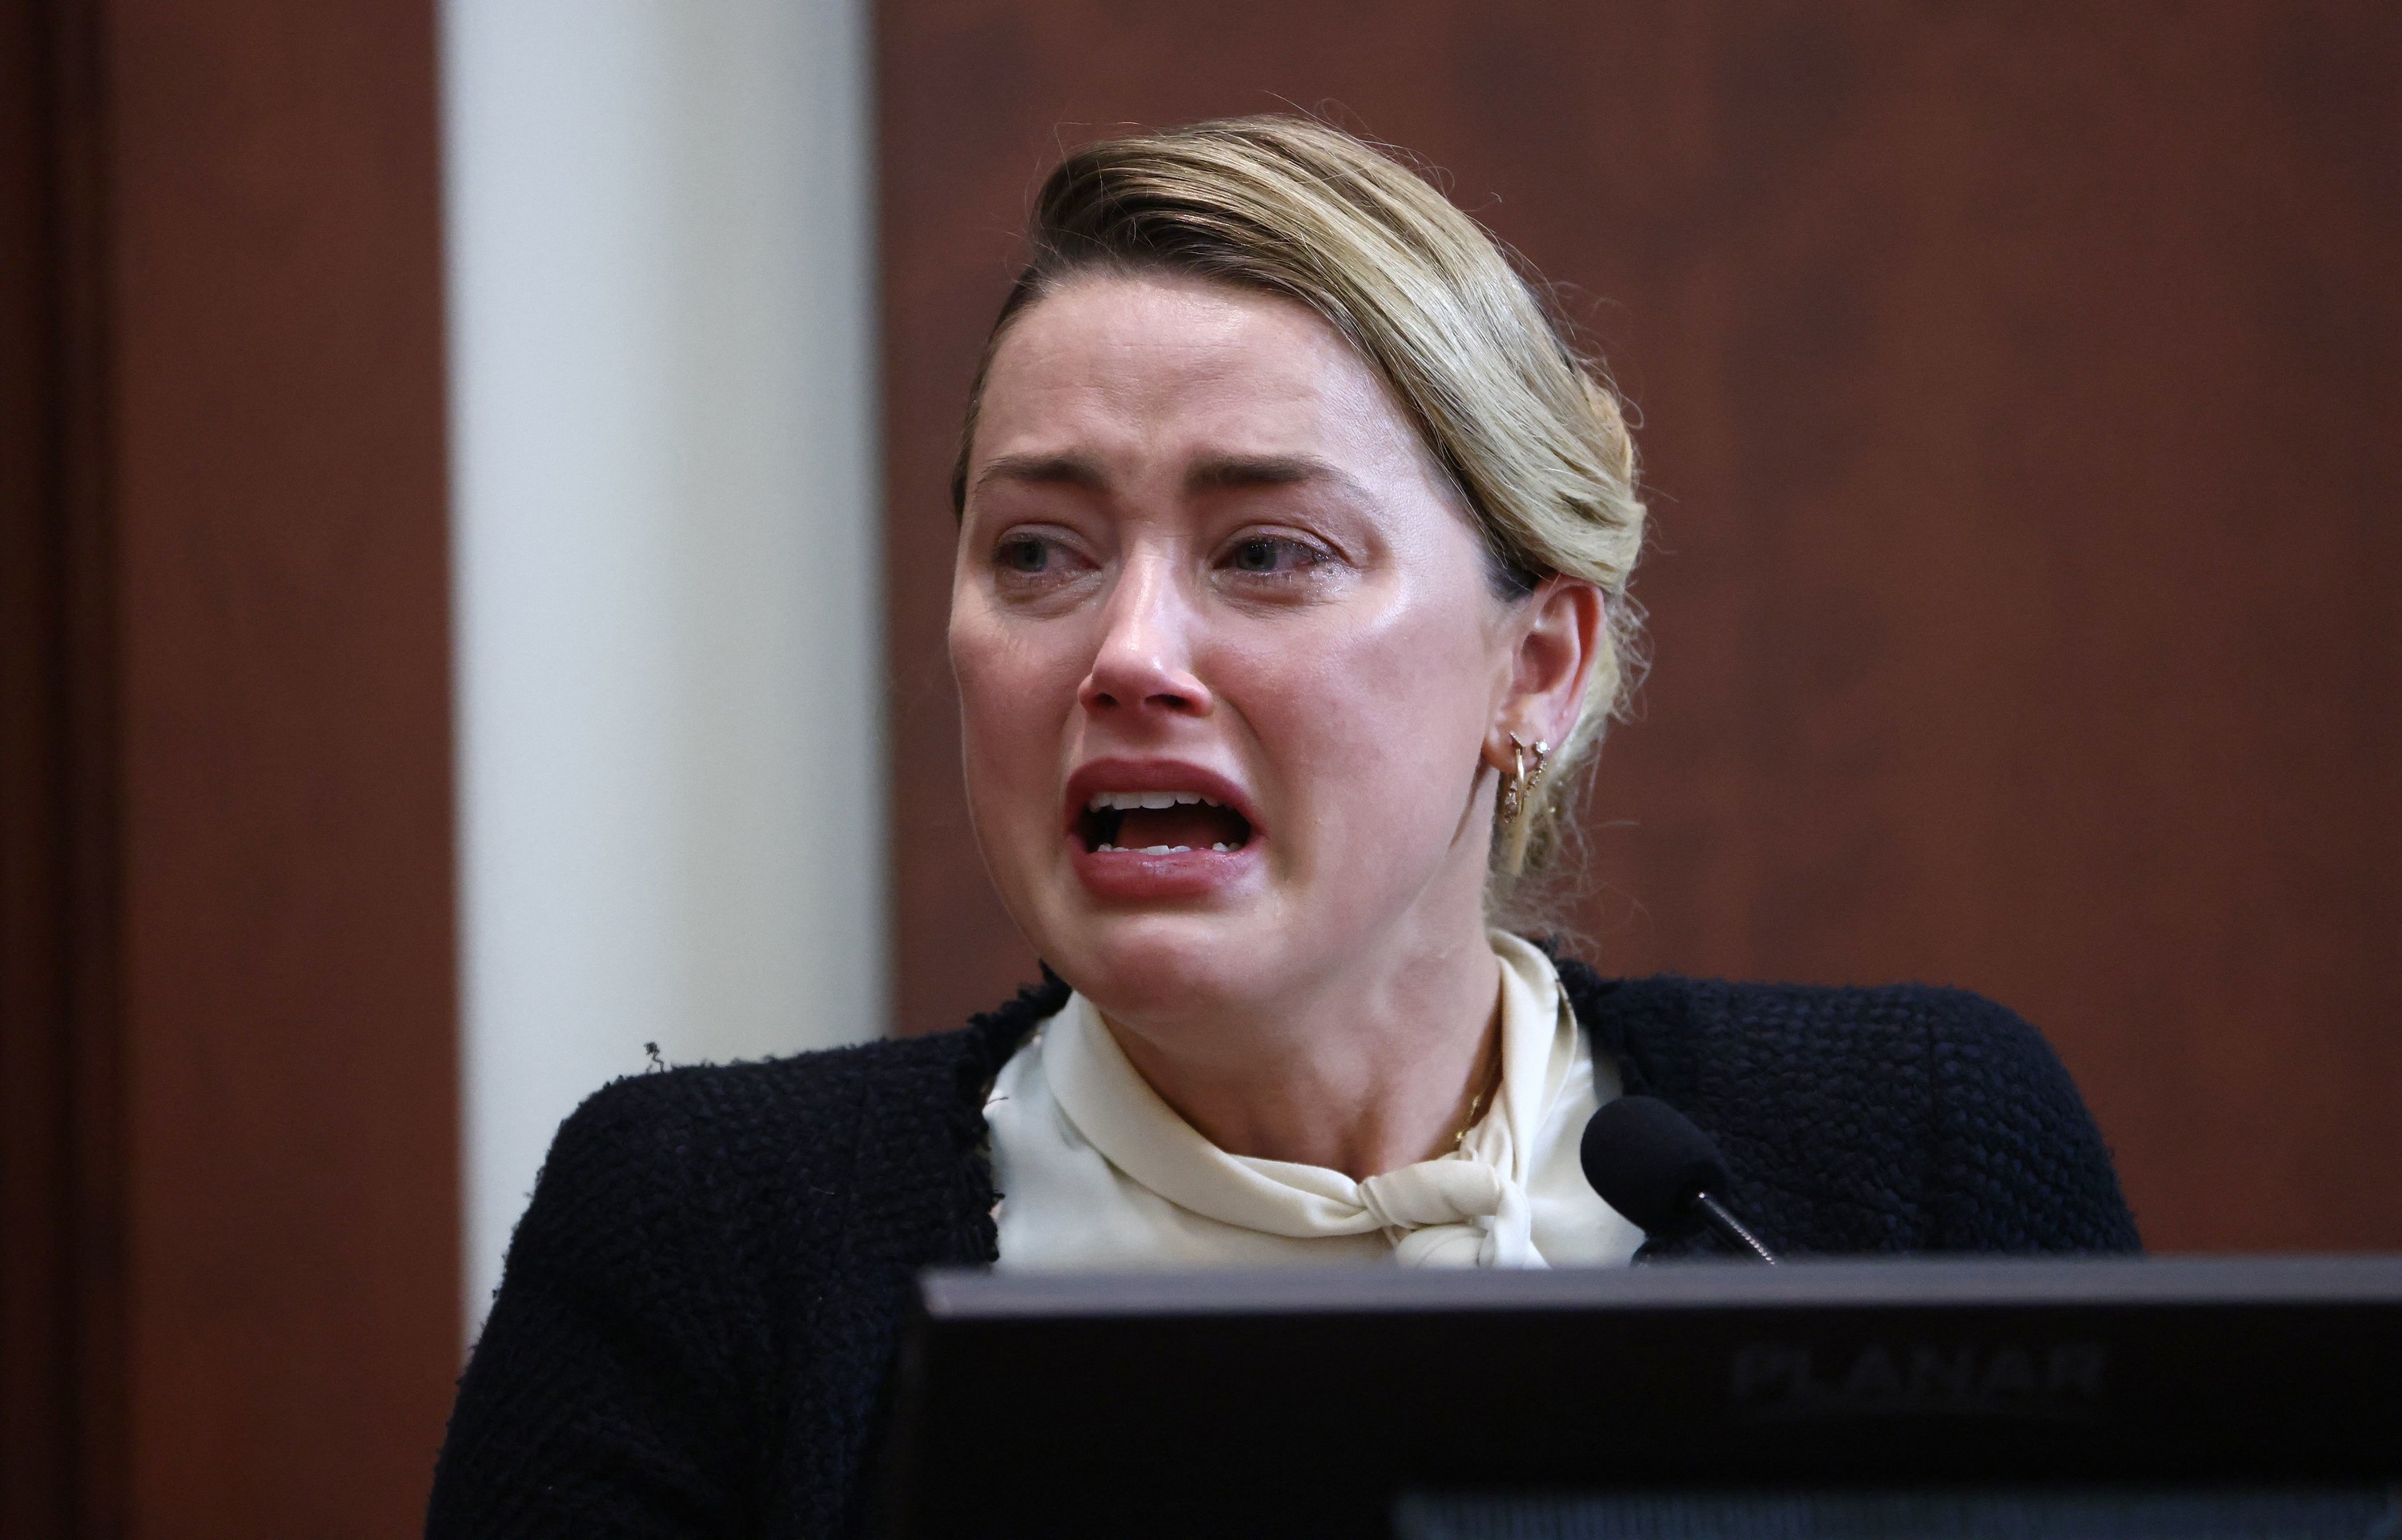 amber crying in court